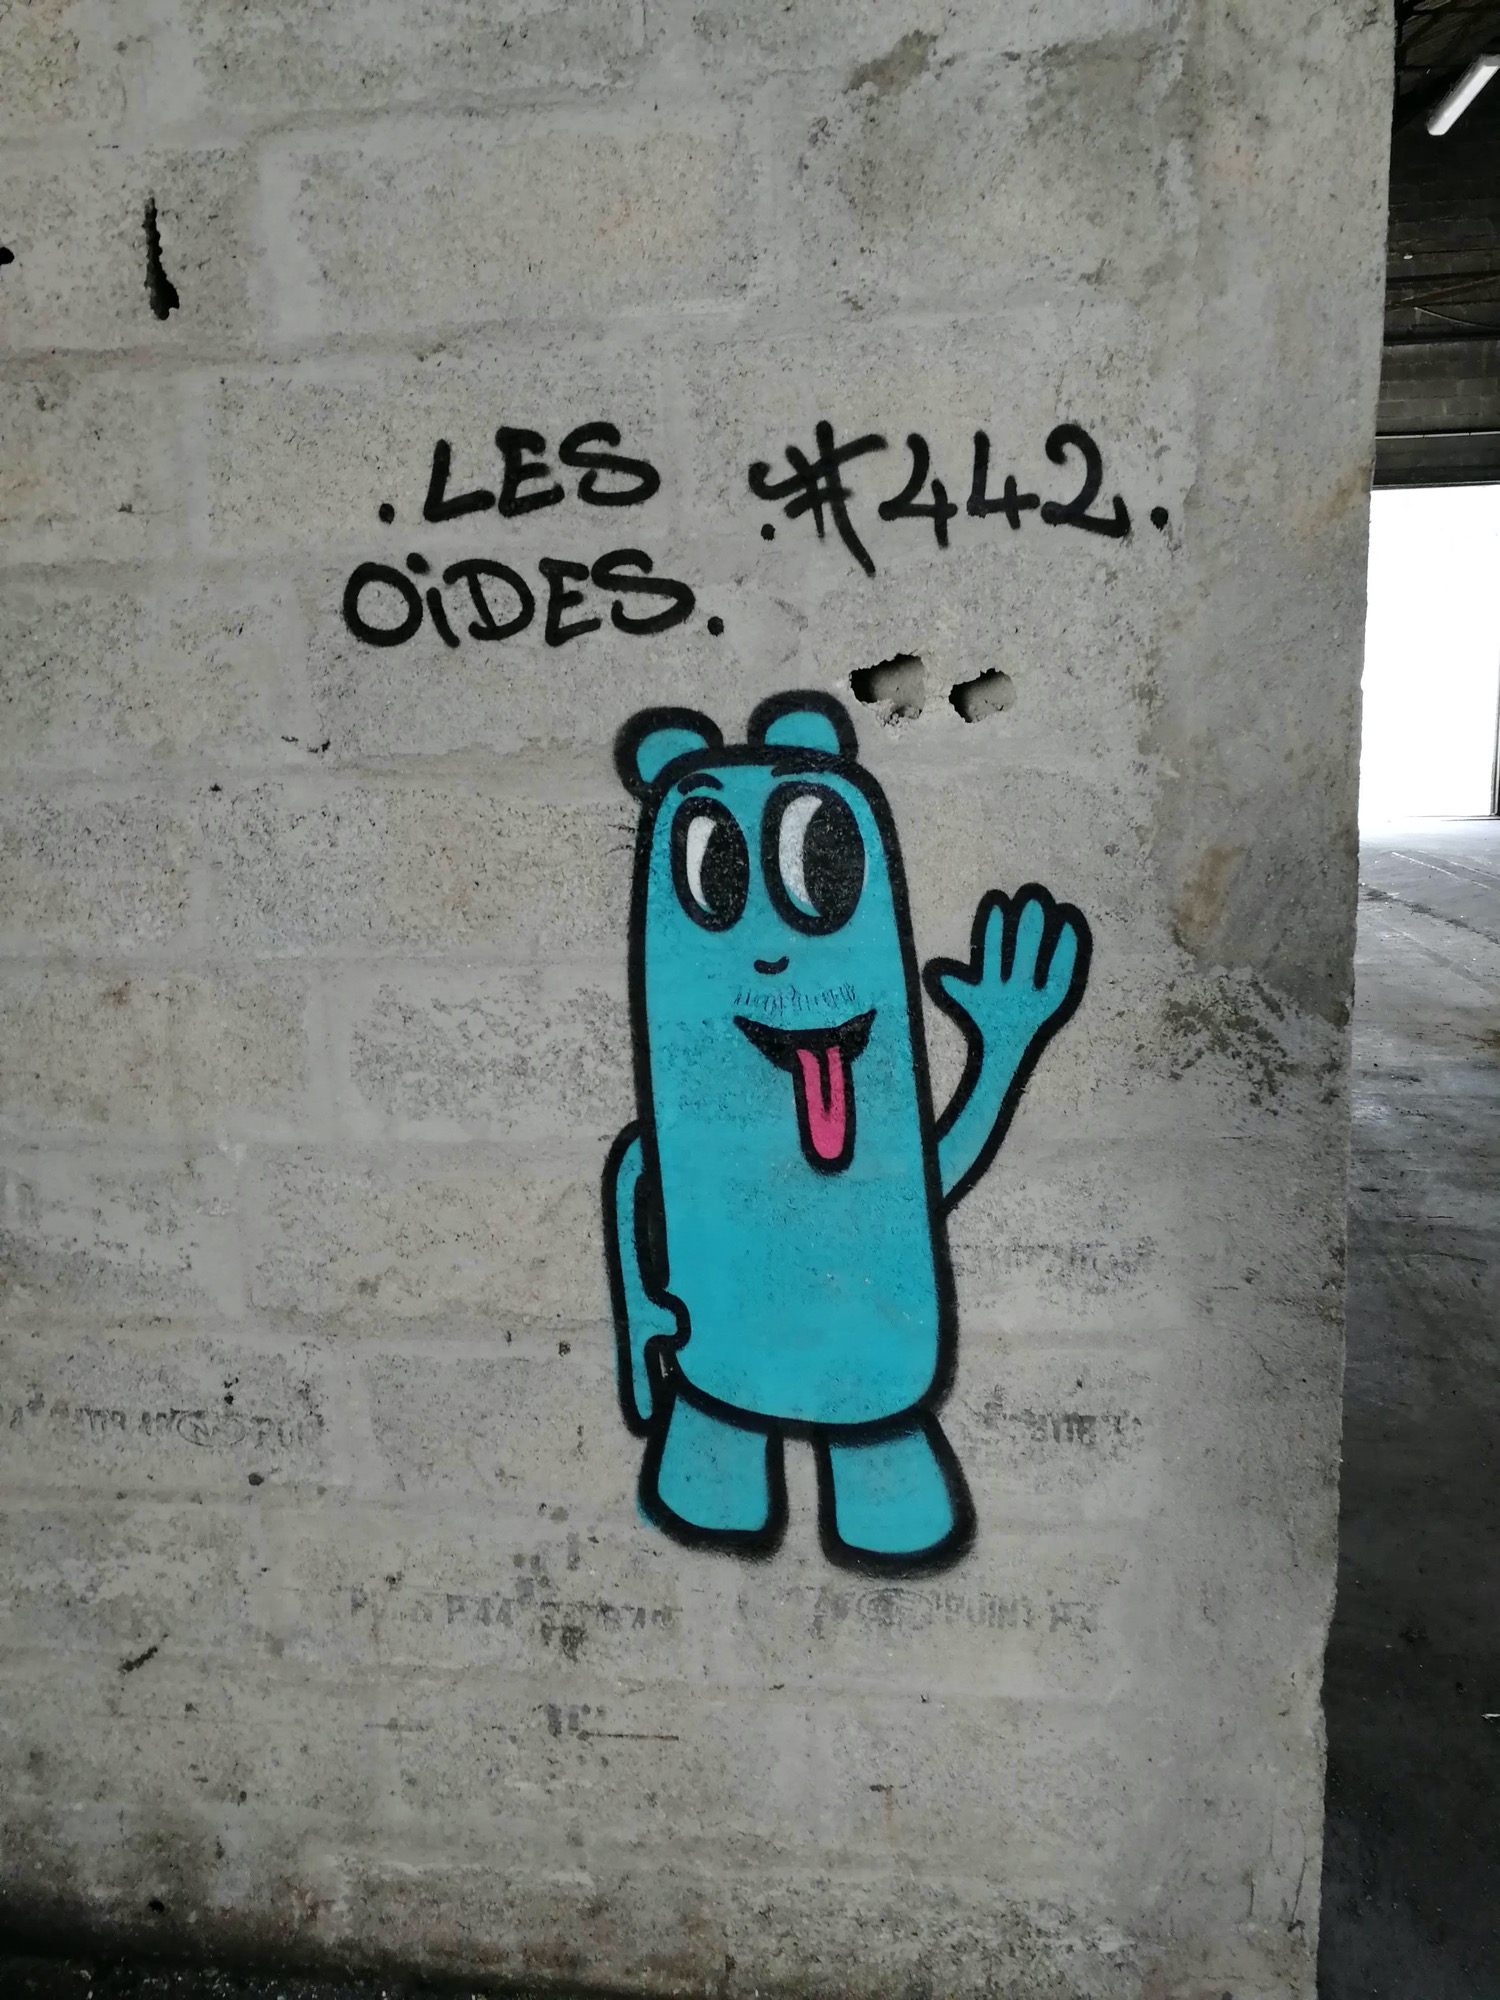 Graffiti 1323 Les oides #442 by the artist Les Oides captured by Rabot in Saint-Nazaire France